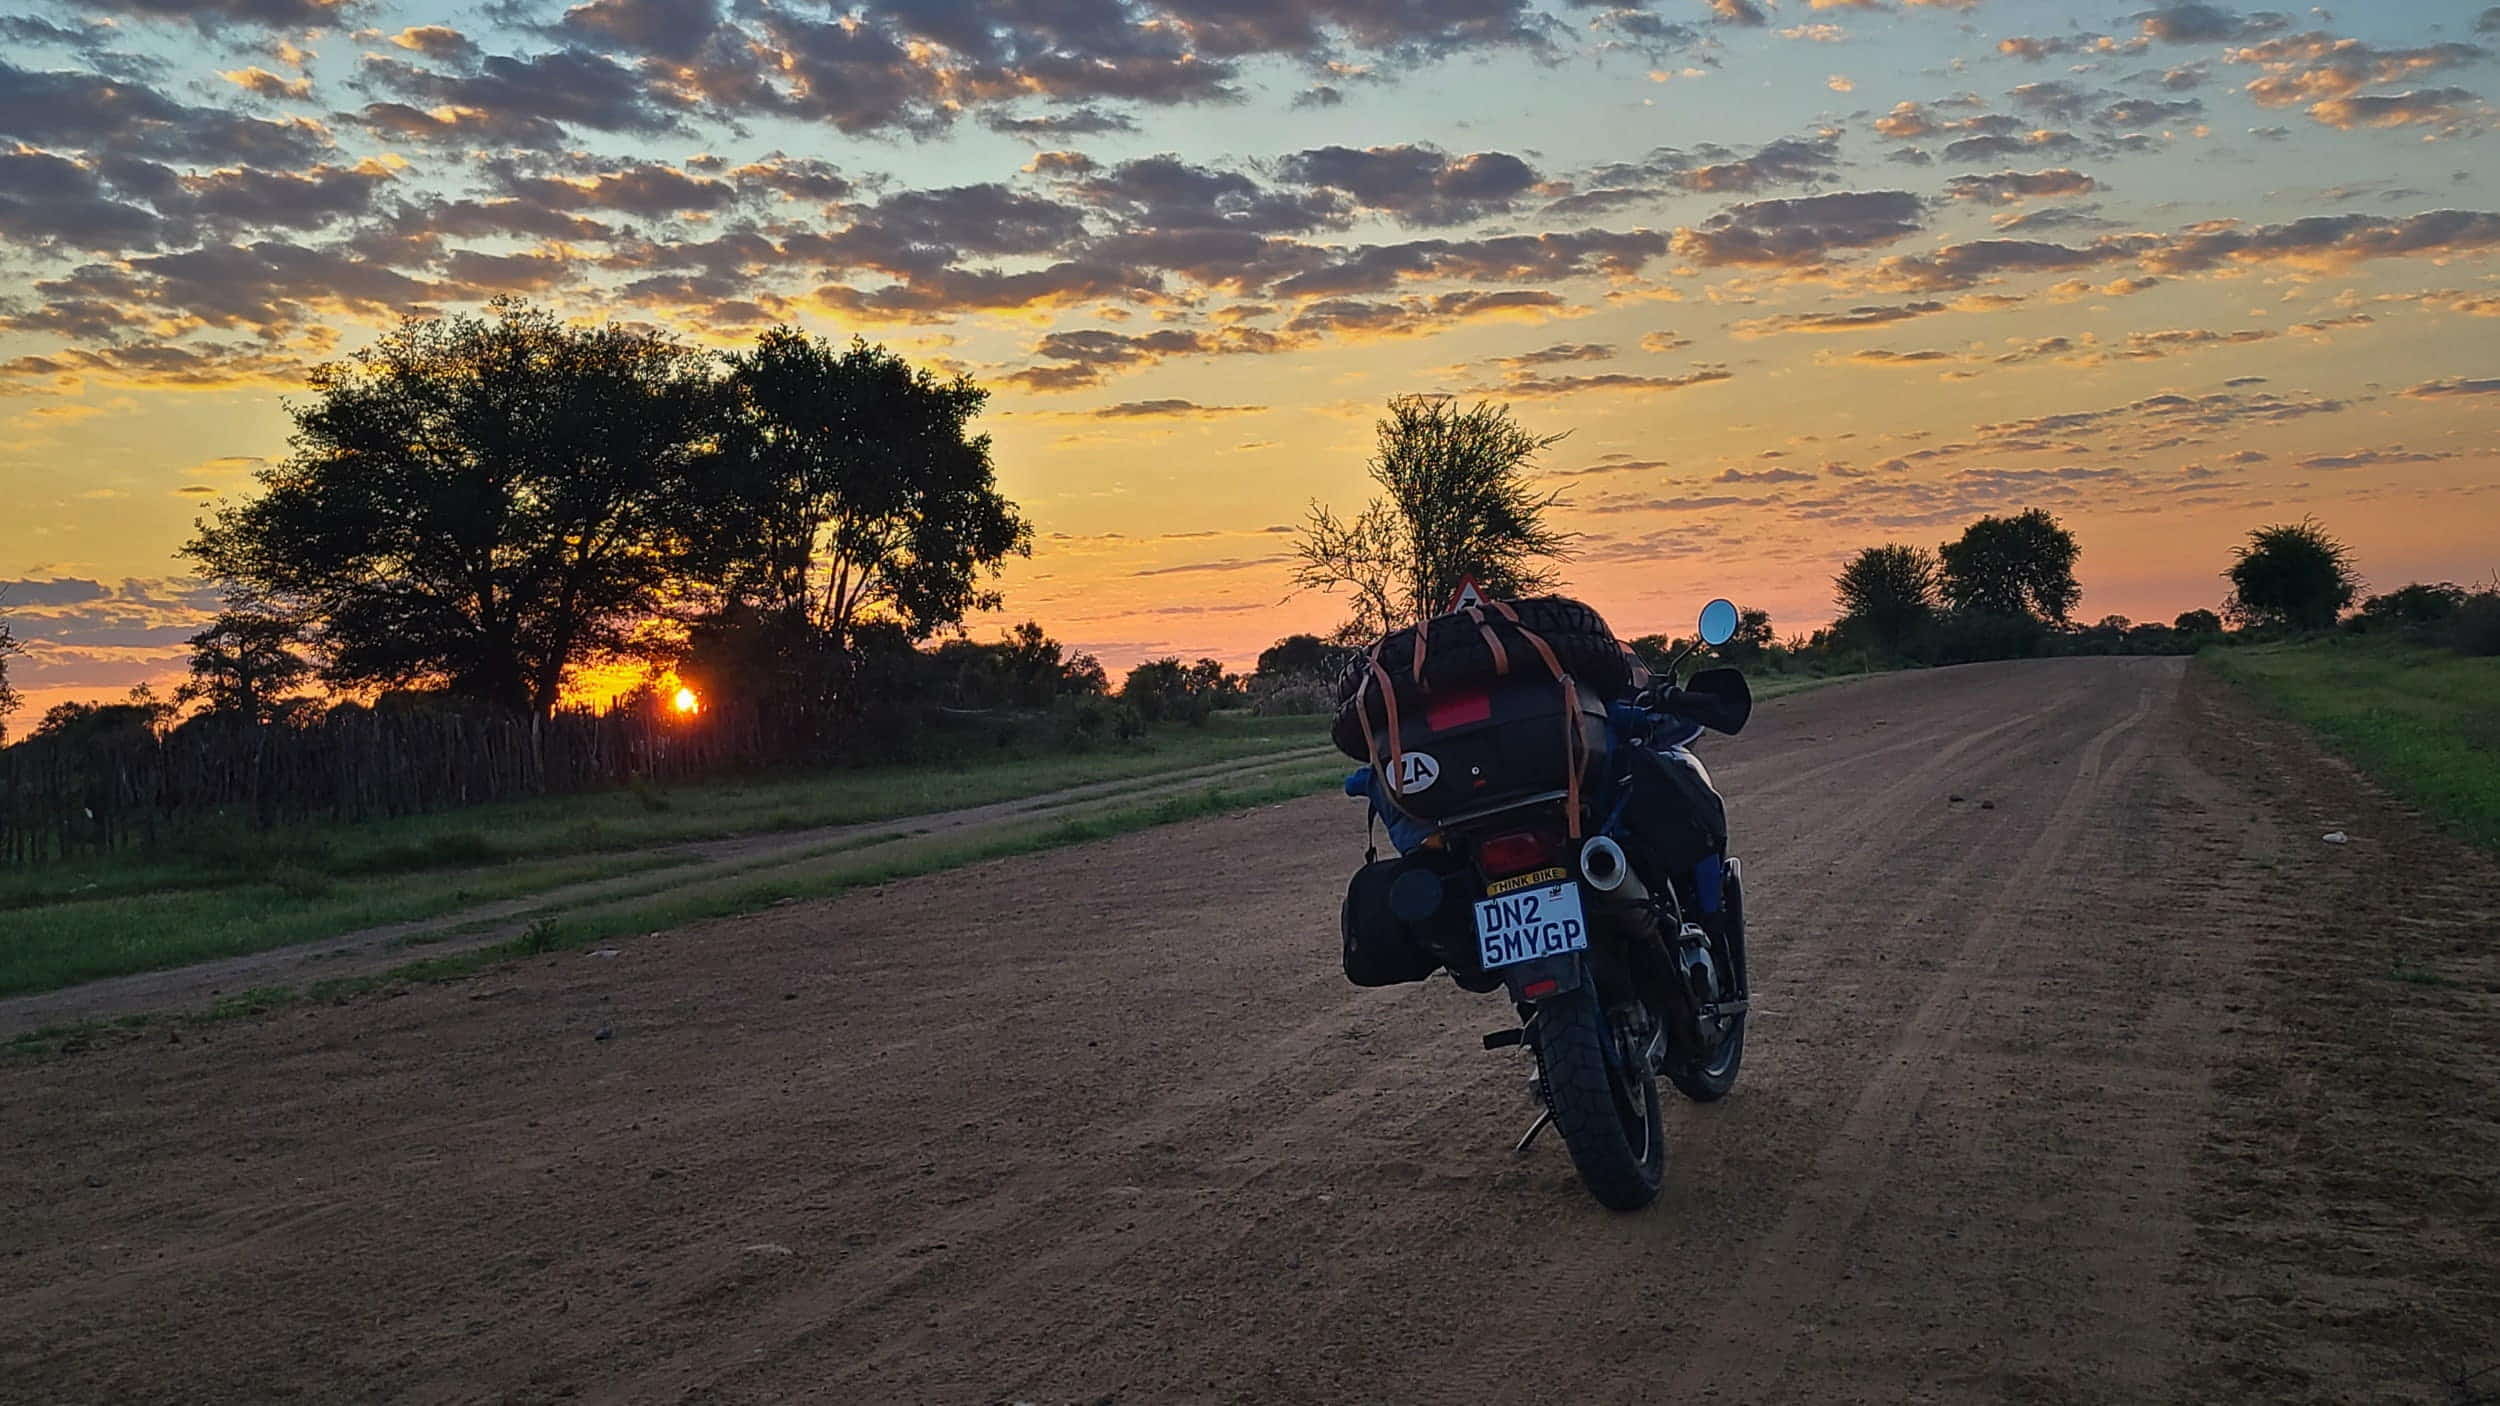 motorcycle parked on dirt road with sun peaking through threes